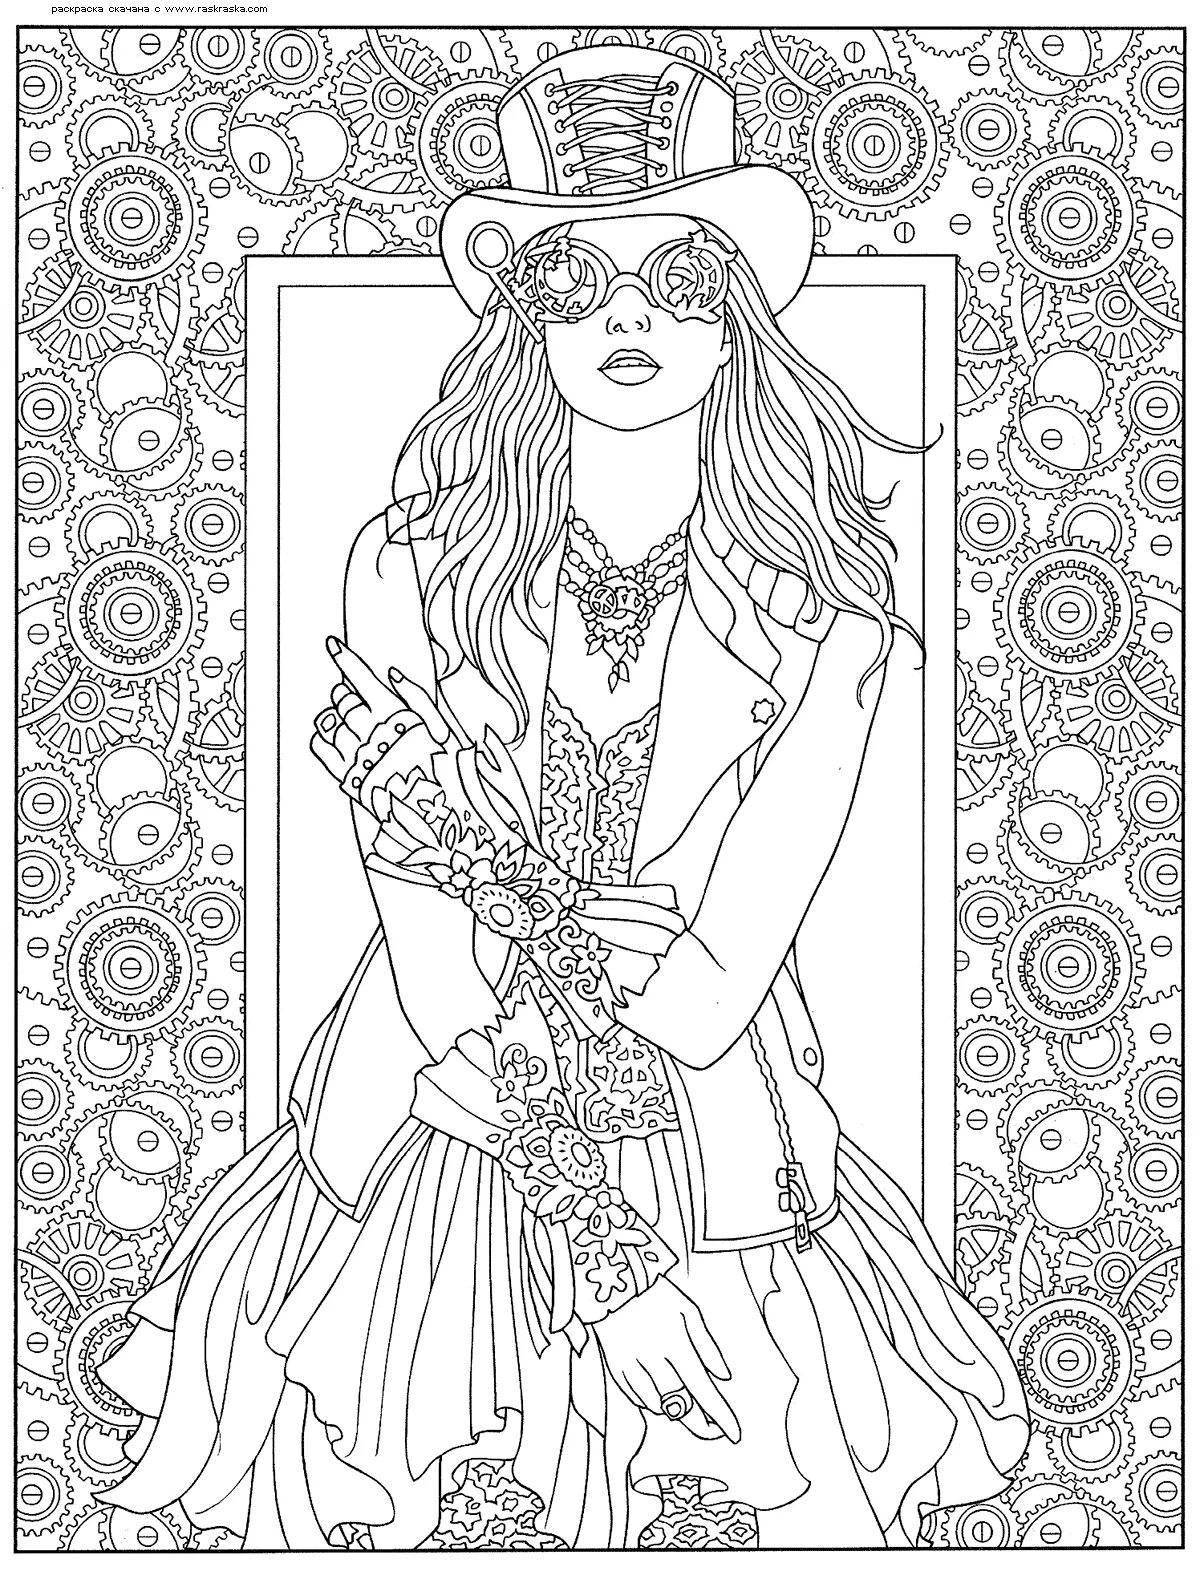 Peaceful steampunk coloring book